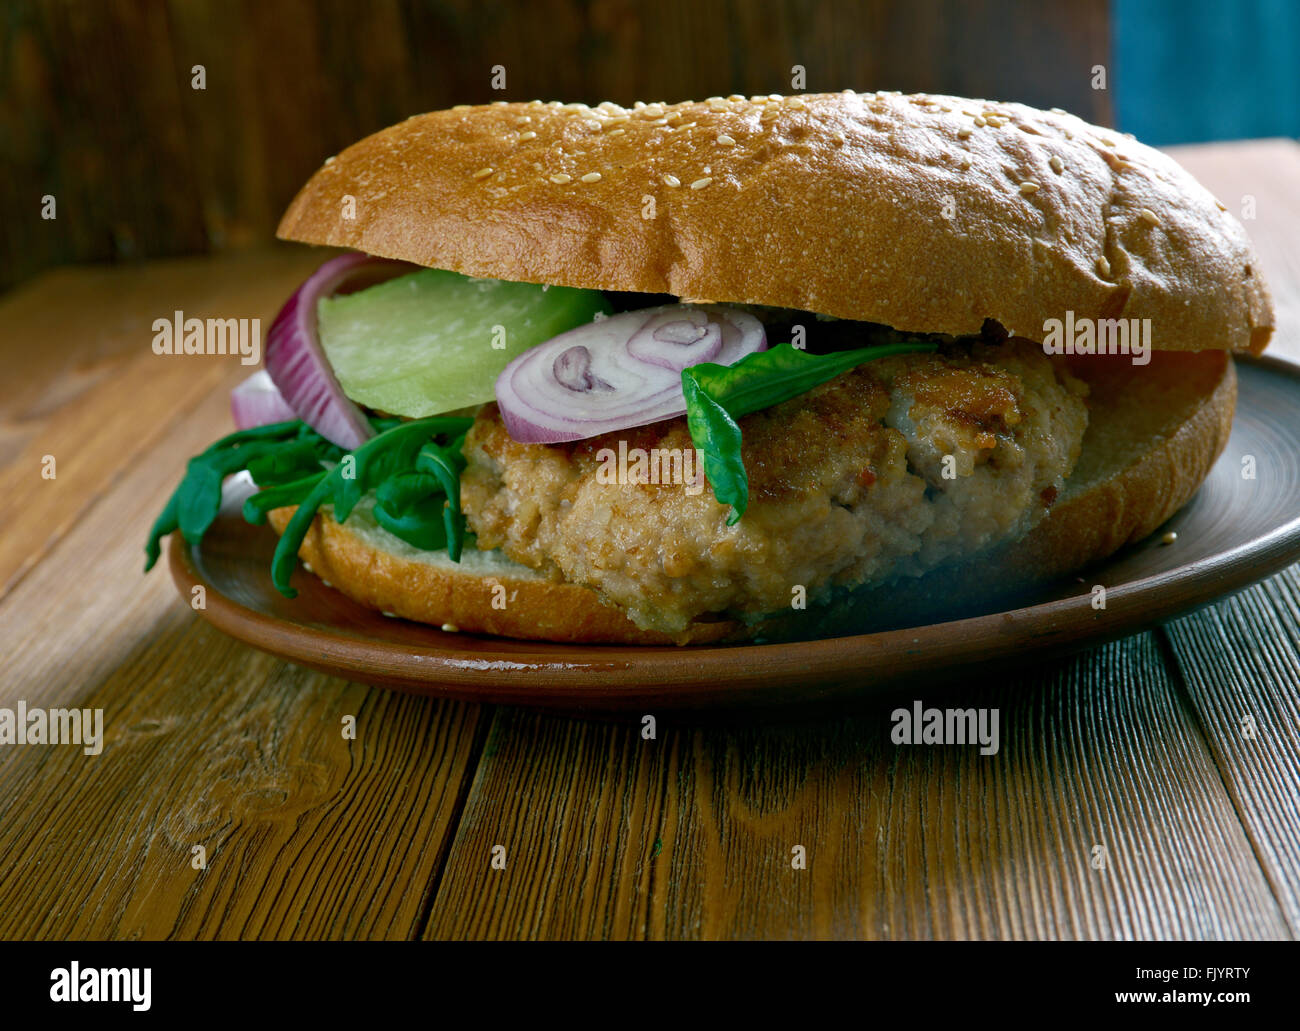 Balkan Burger with lettuce served .close up Stock Photo